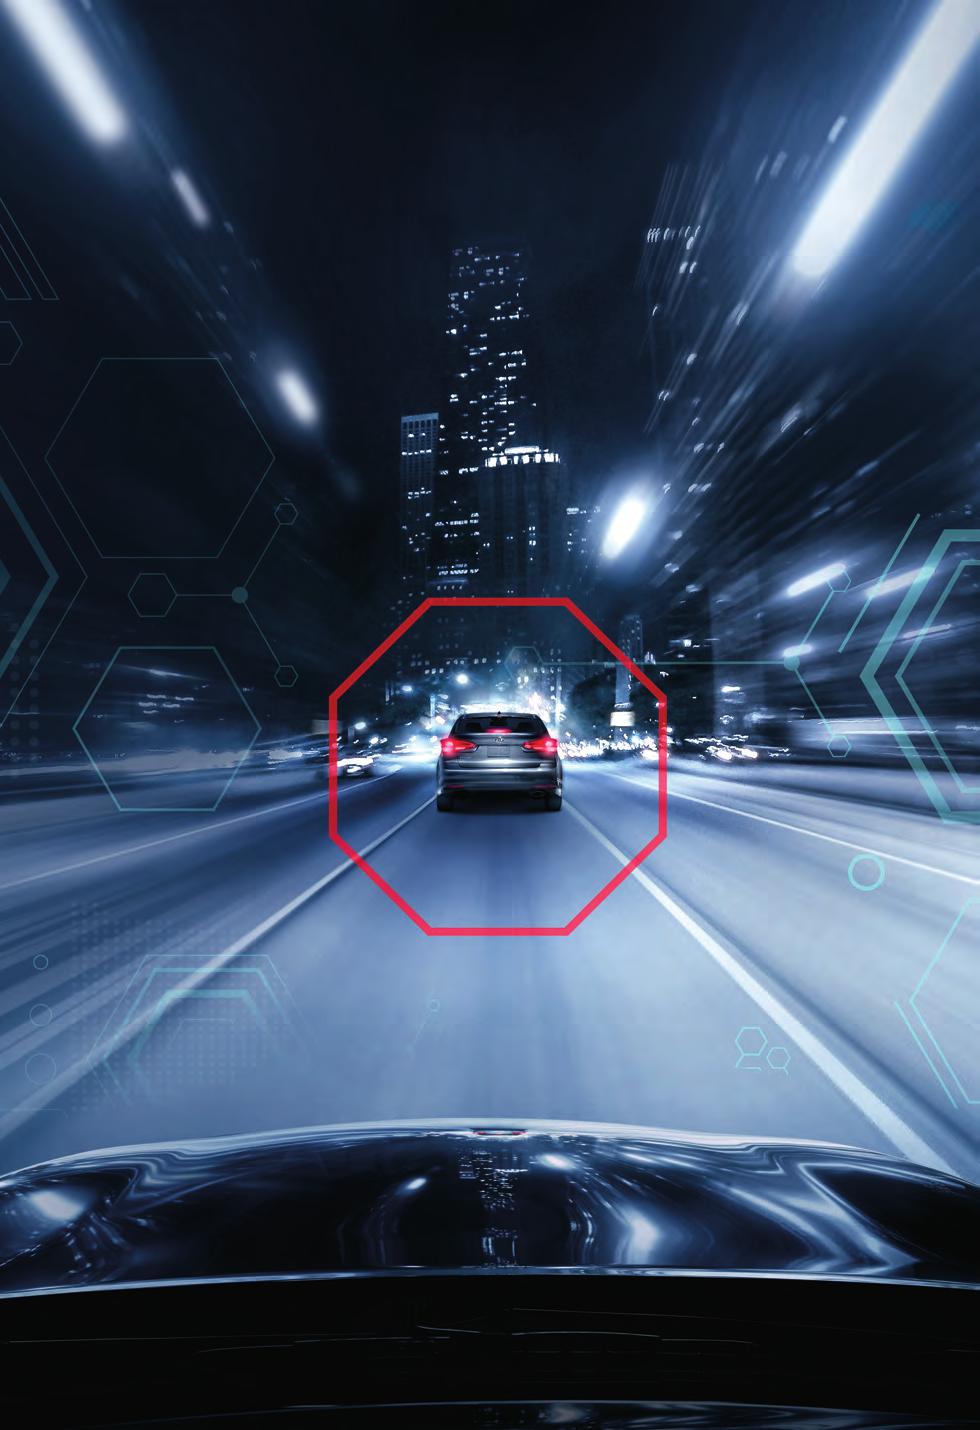 KIA.CA/RIO BRAKING ASSISTANCE Senses, alerts and helps you STOP It s like having a co-pilot always on the lookout with these advanced features.